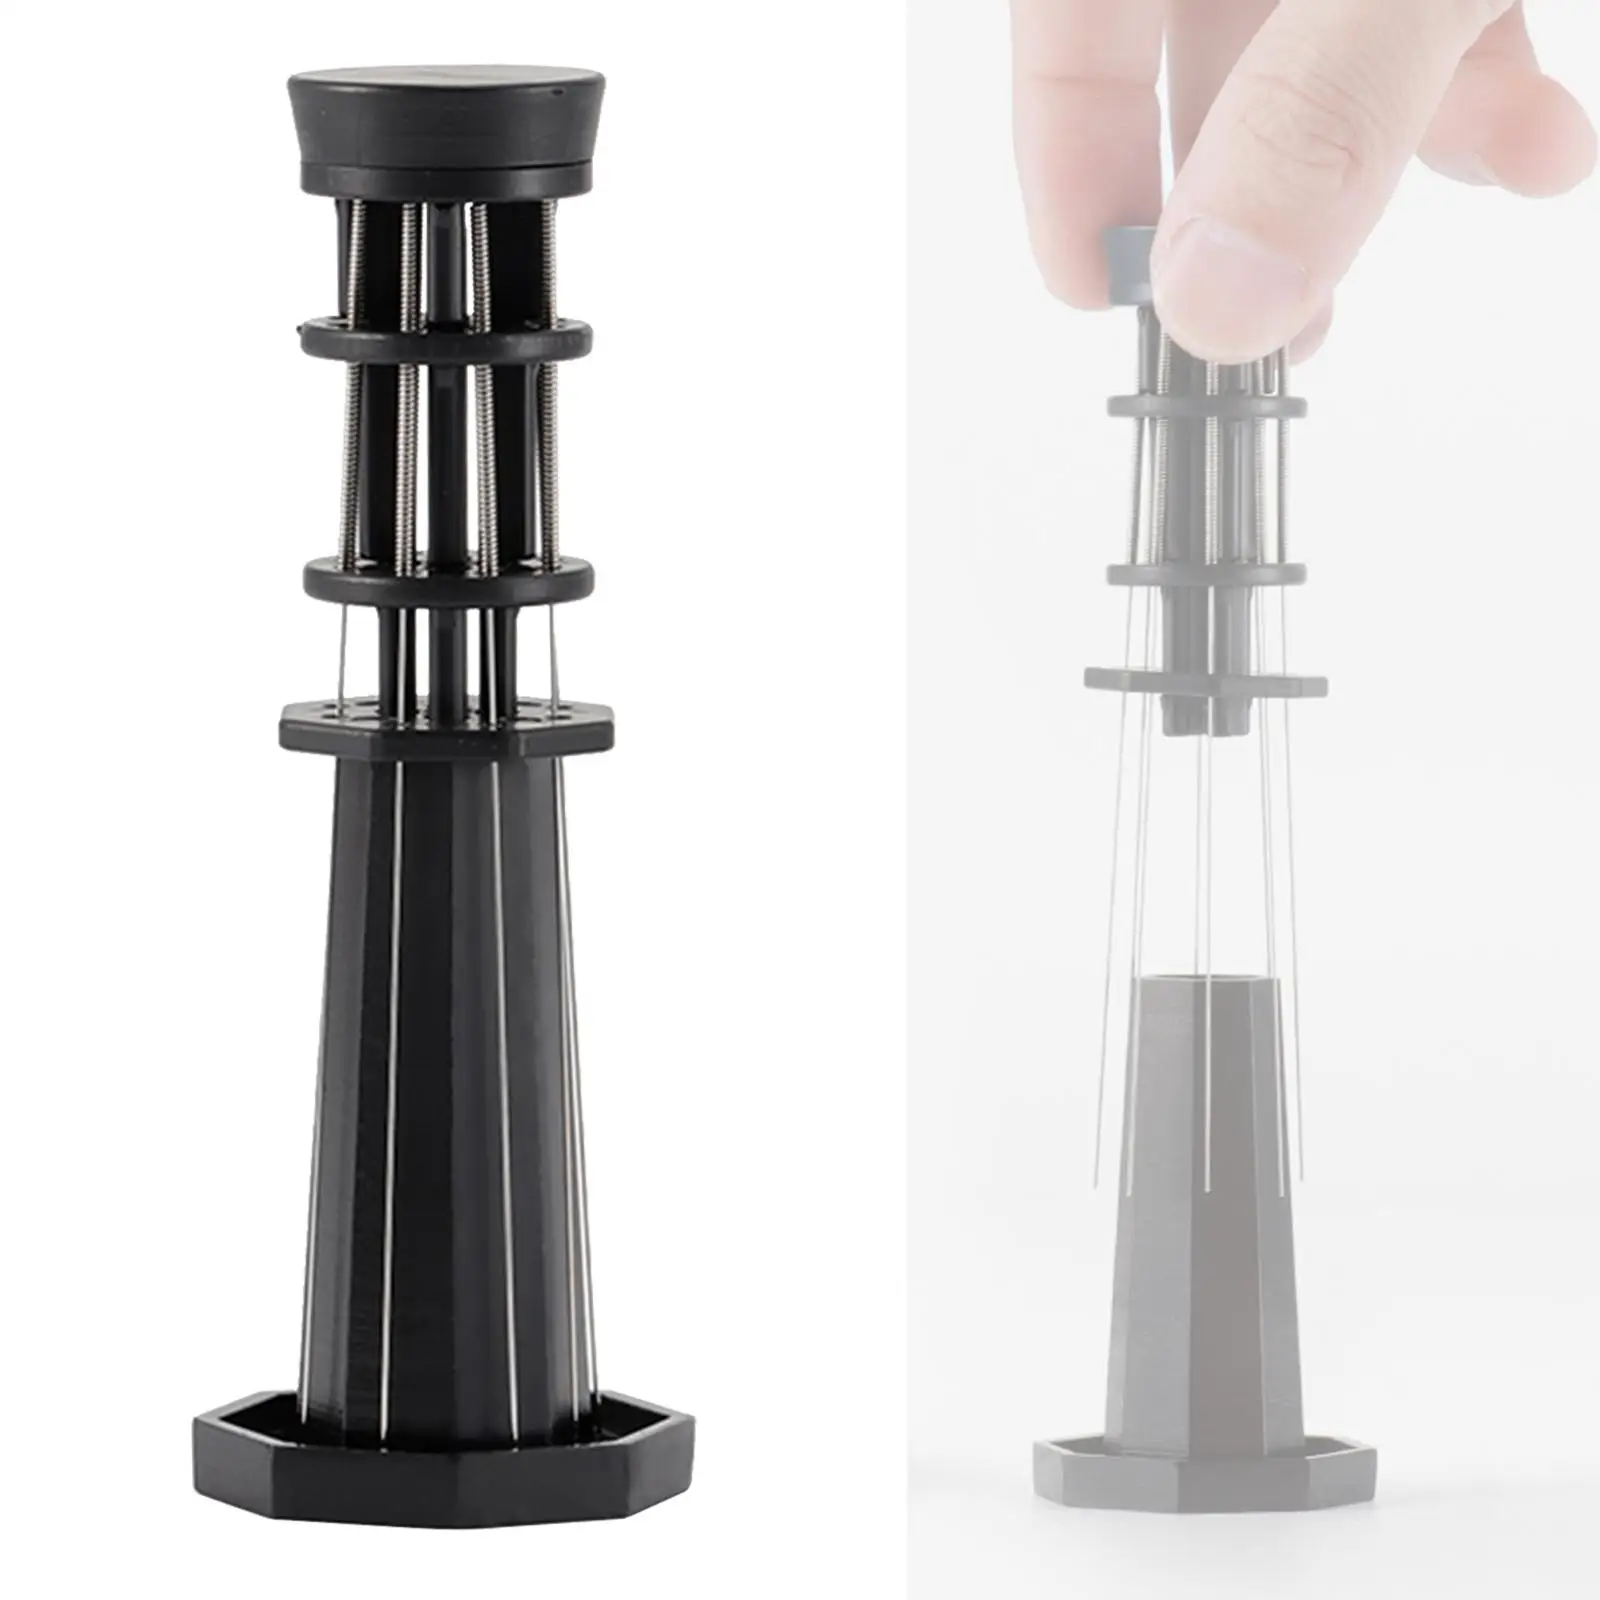 Adjustable Coffee Stirring Tool Coffee Grounds Needle Hand Tamper with Stand Needle Type Distributor for Office Home Cafe